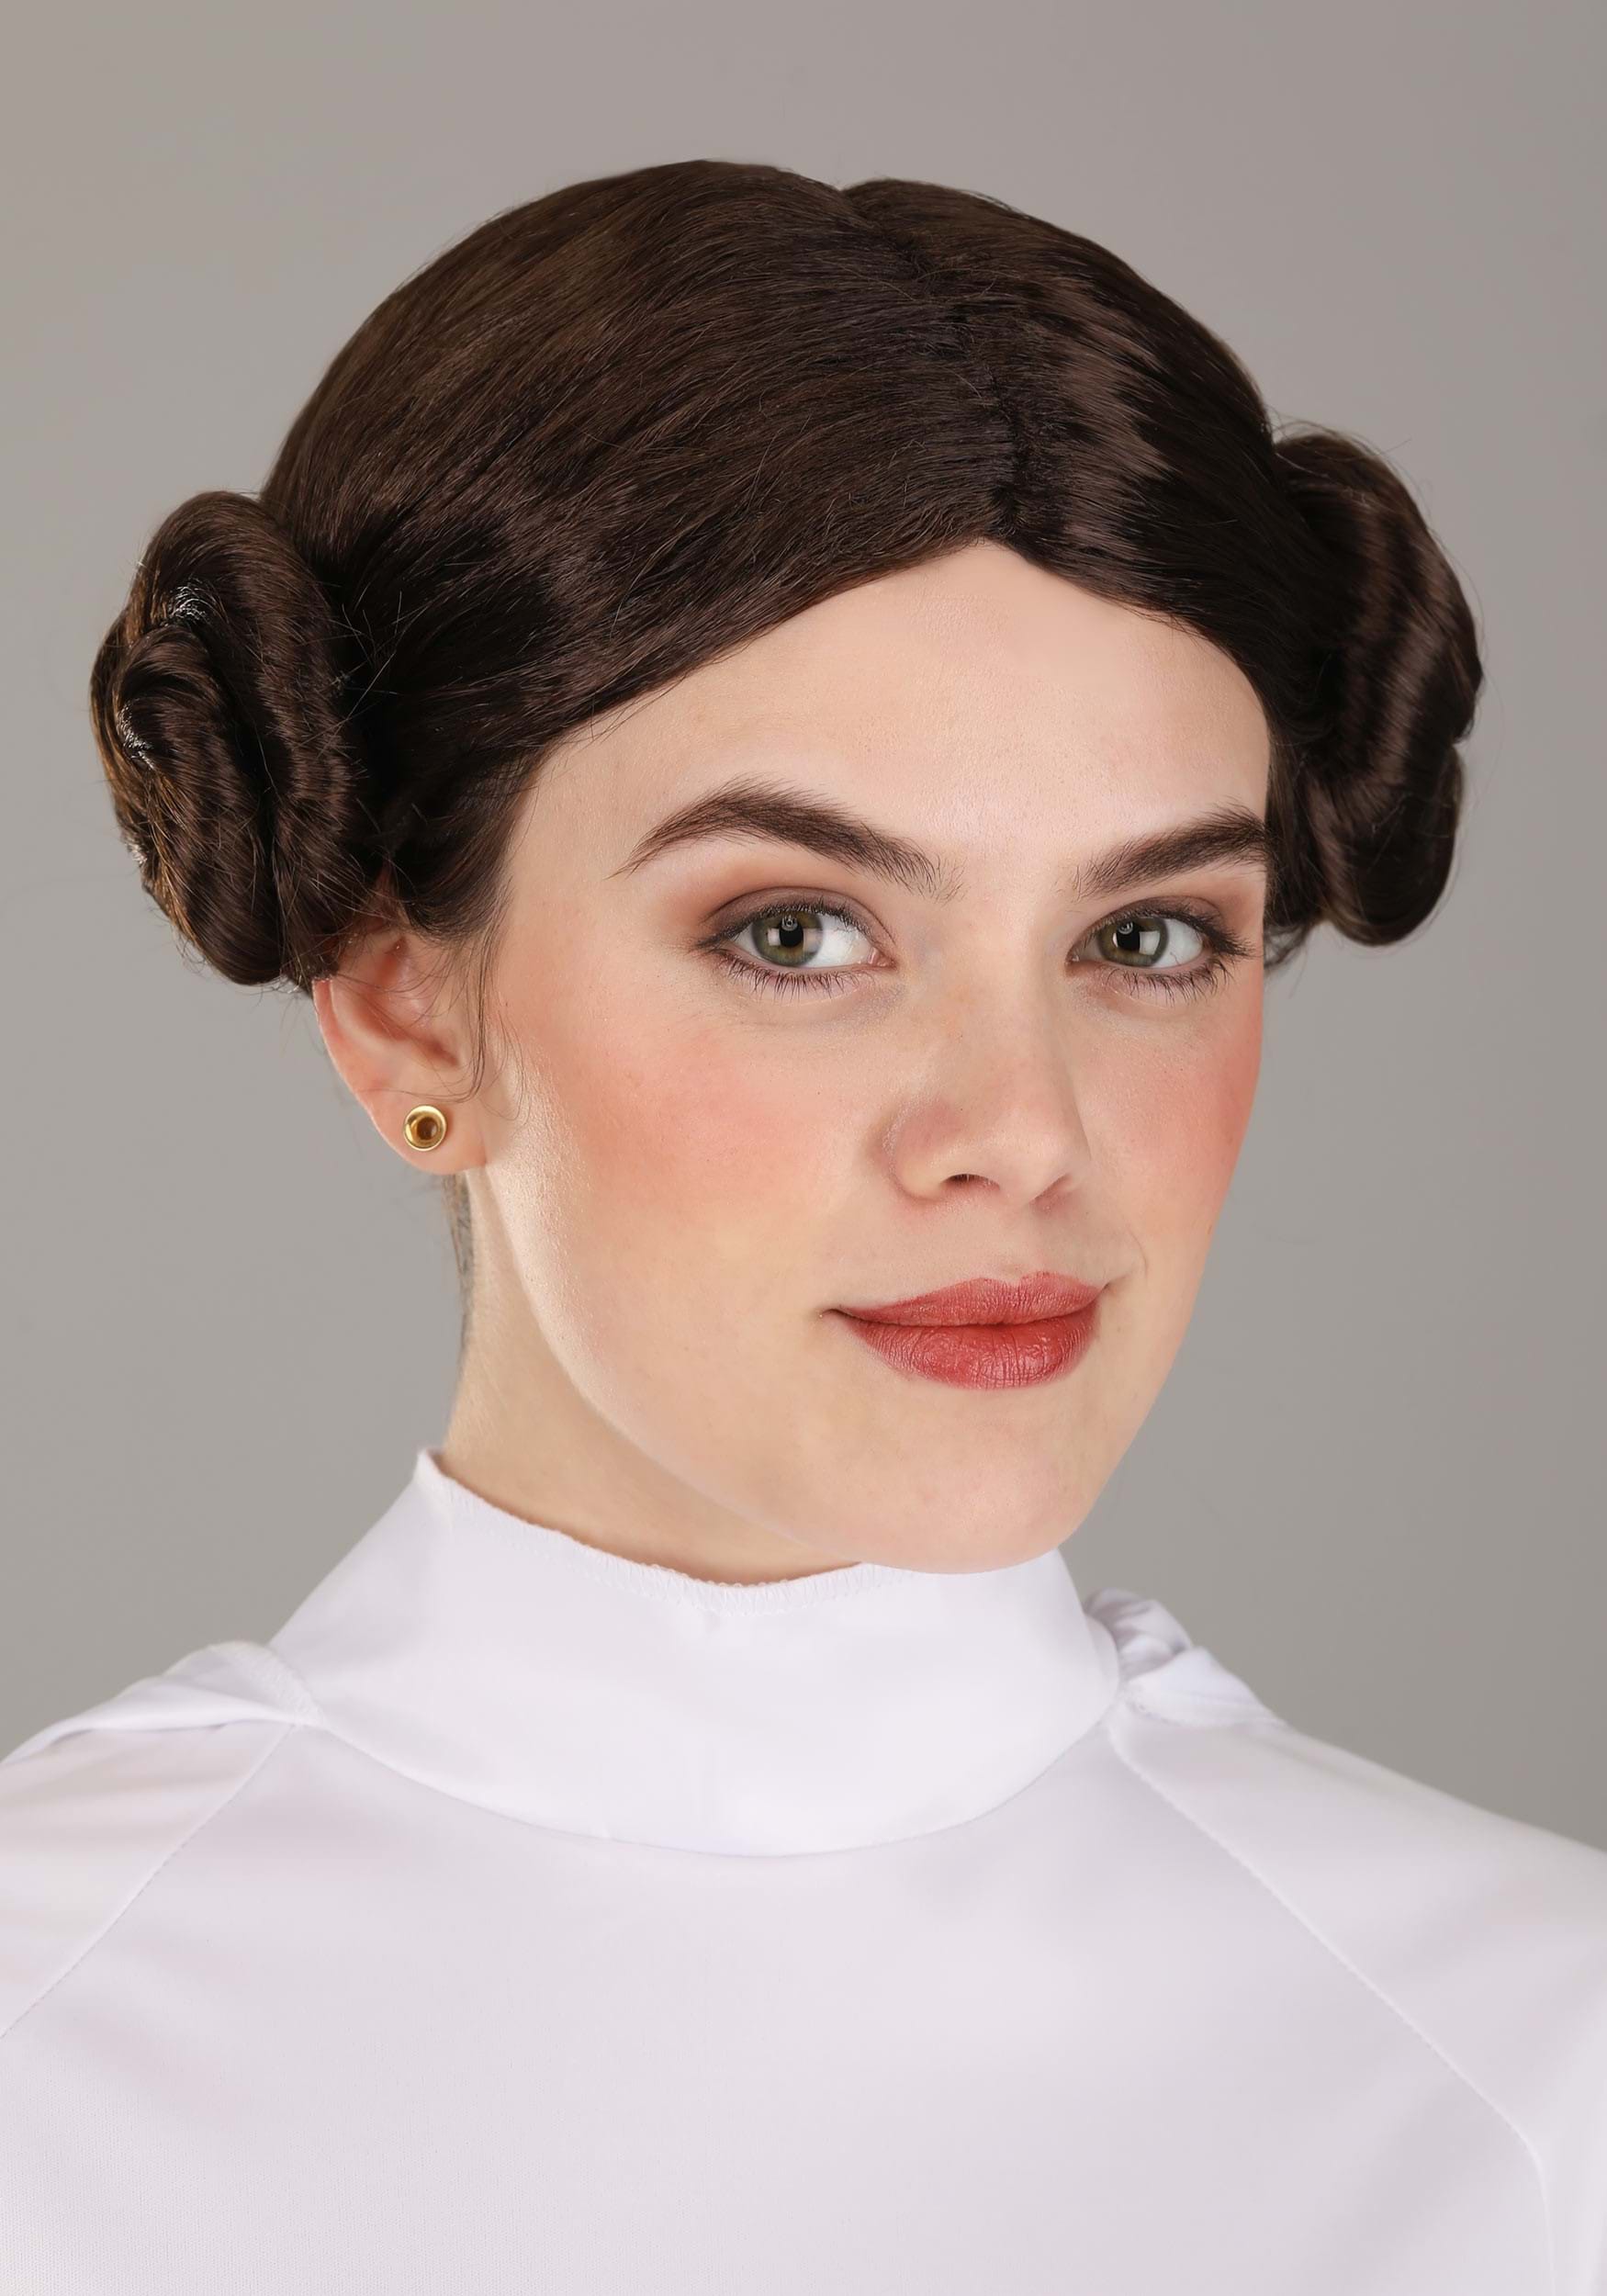 Princess Leia Hooded Fancy Dress Costume For Adults